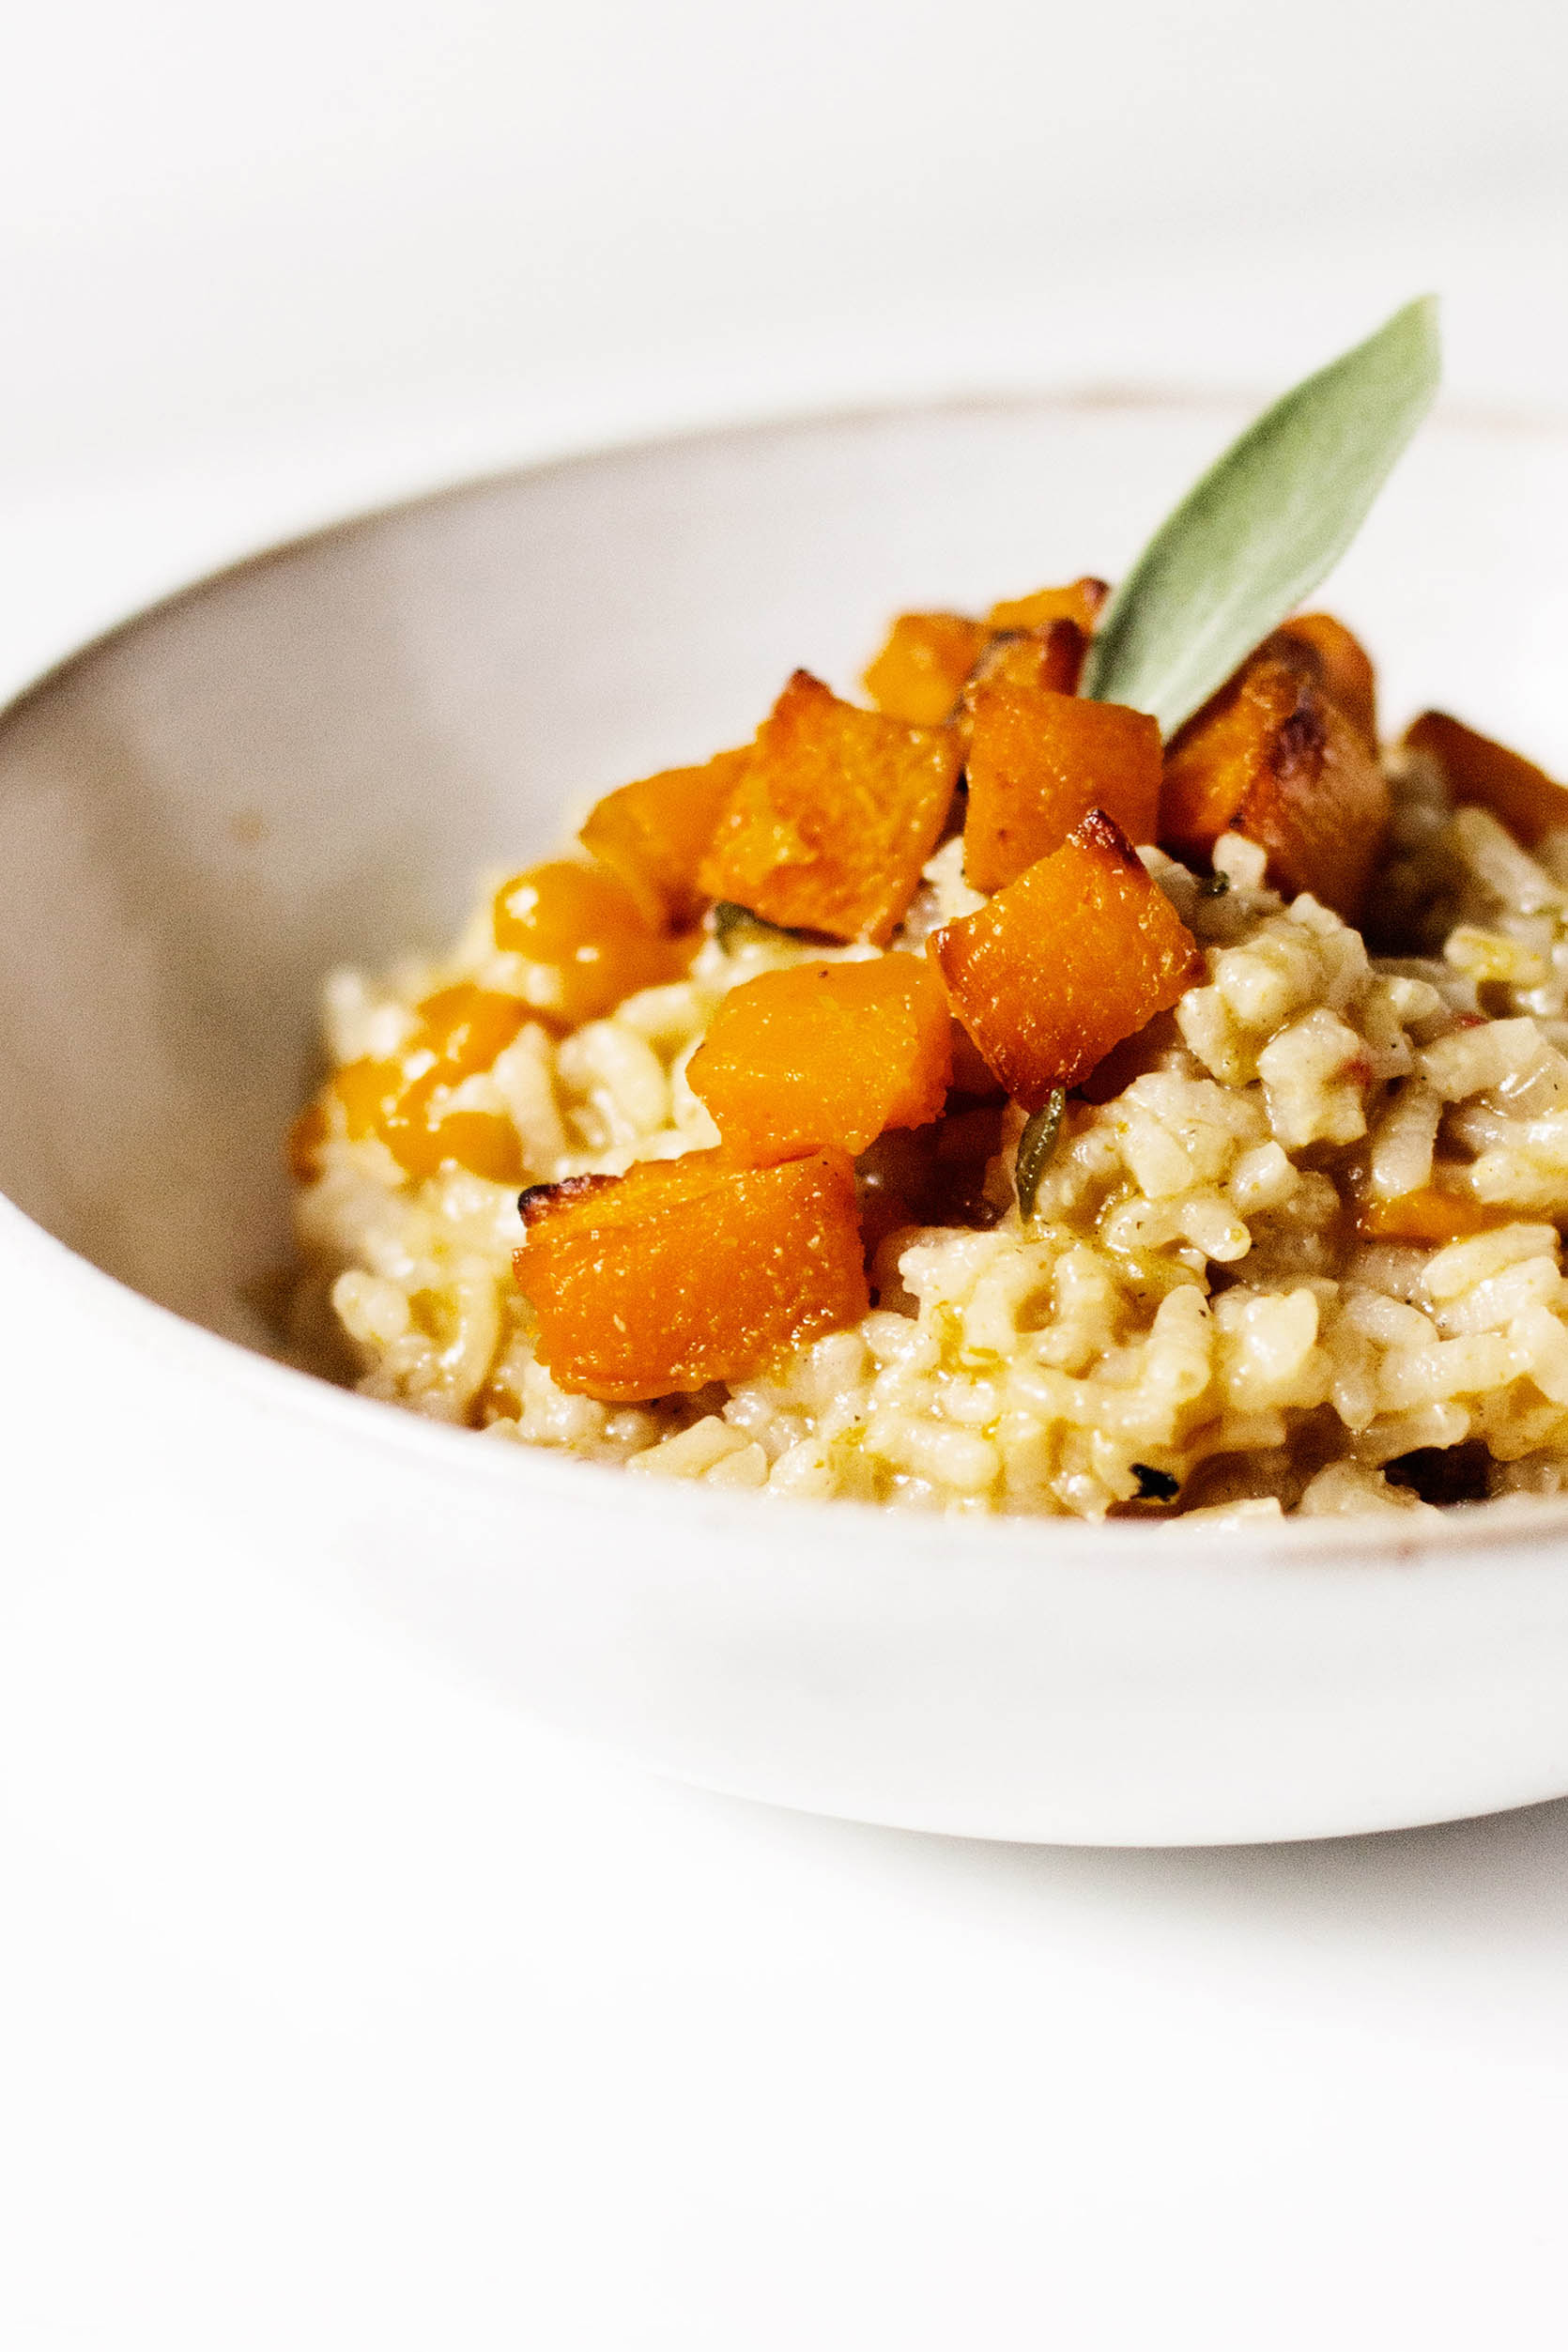 2 tablespoons minced onion  Butternut squash risotto, Squash risotto, Minced  onion